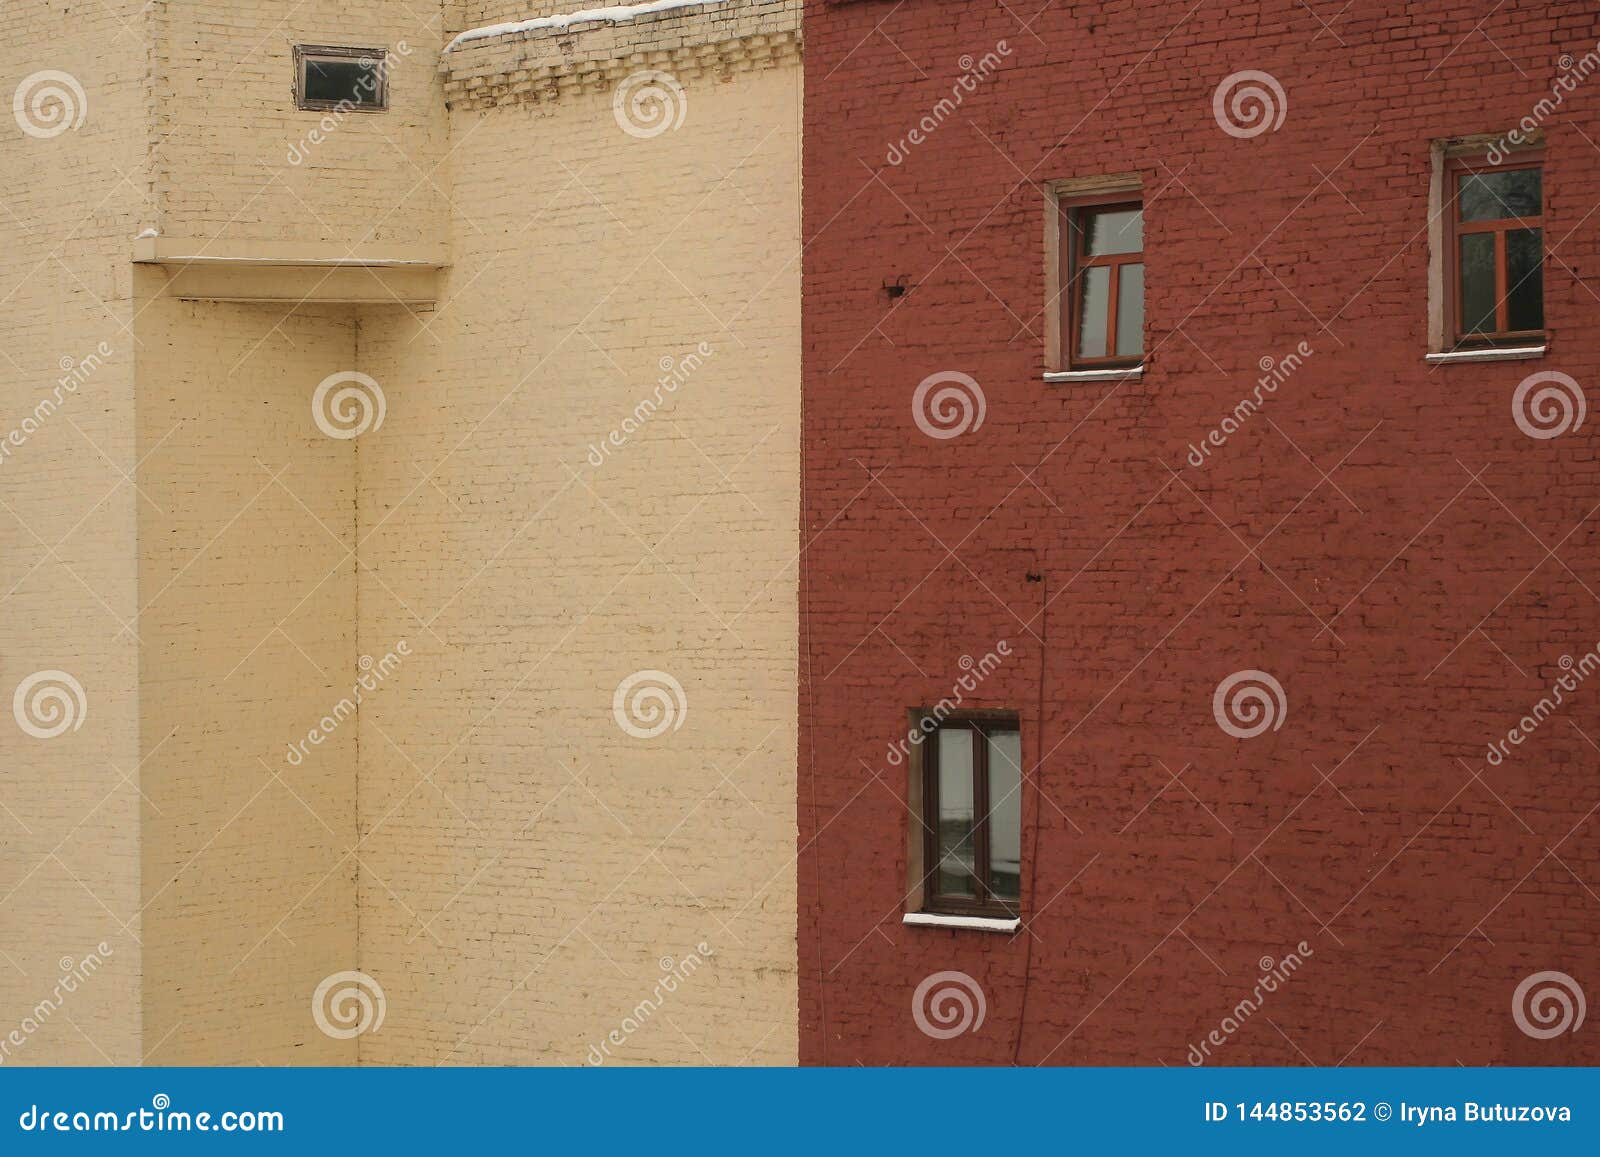 Two Brick Houses - Beige and Terracotta Stock Photo - Image of travel,  brick: 144853562